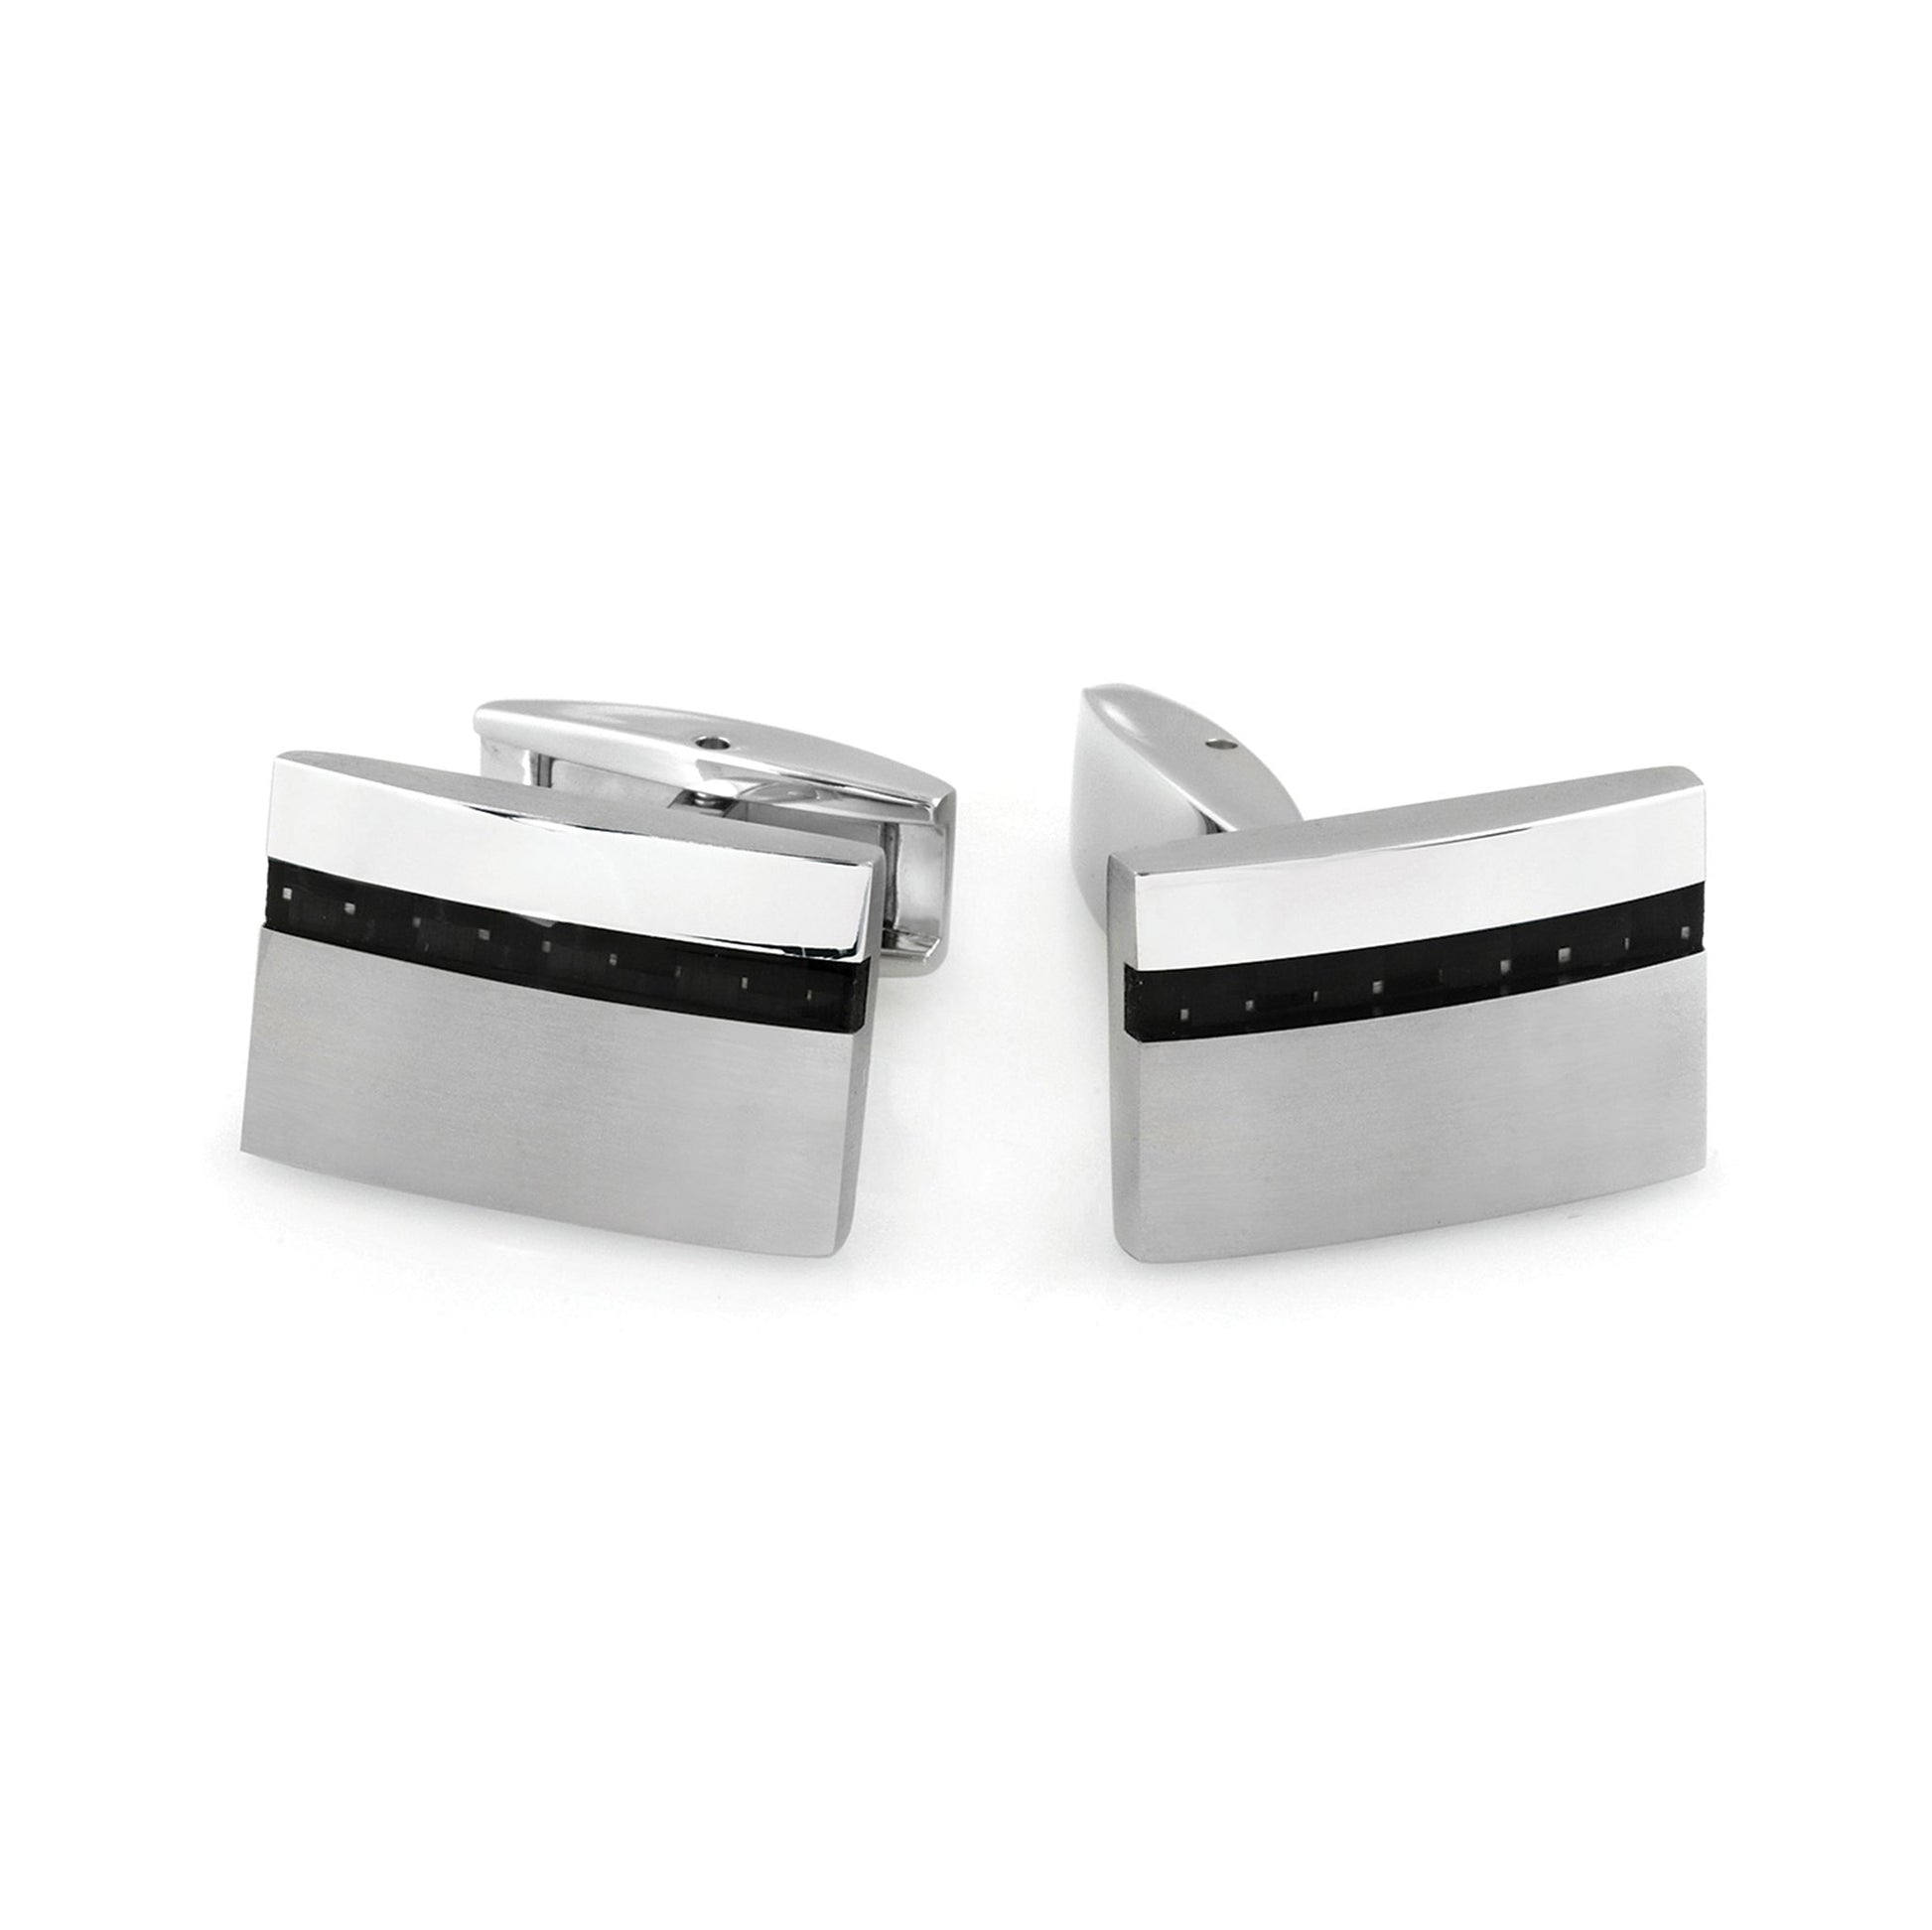 A stainless steel & carbon fiber cufflinks displayed on a neutral white background.